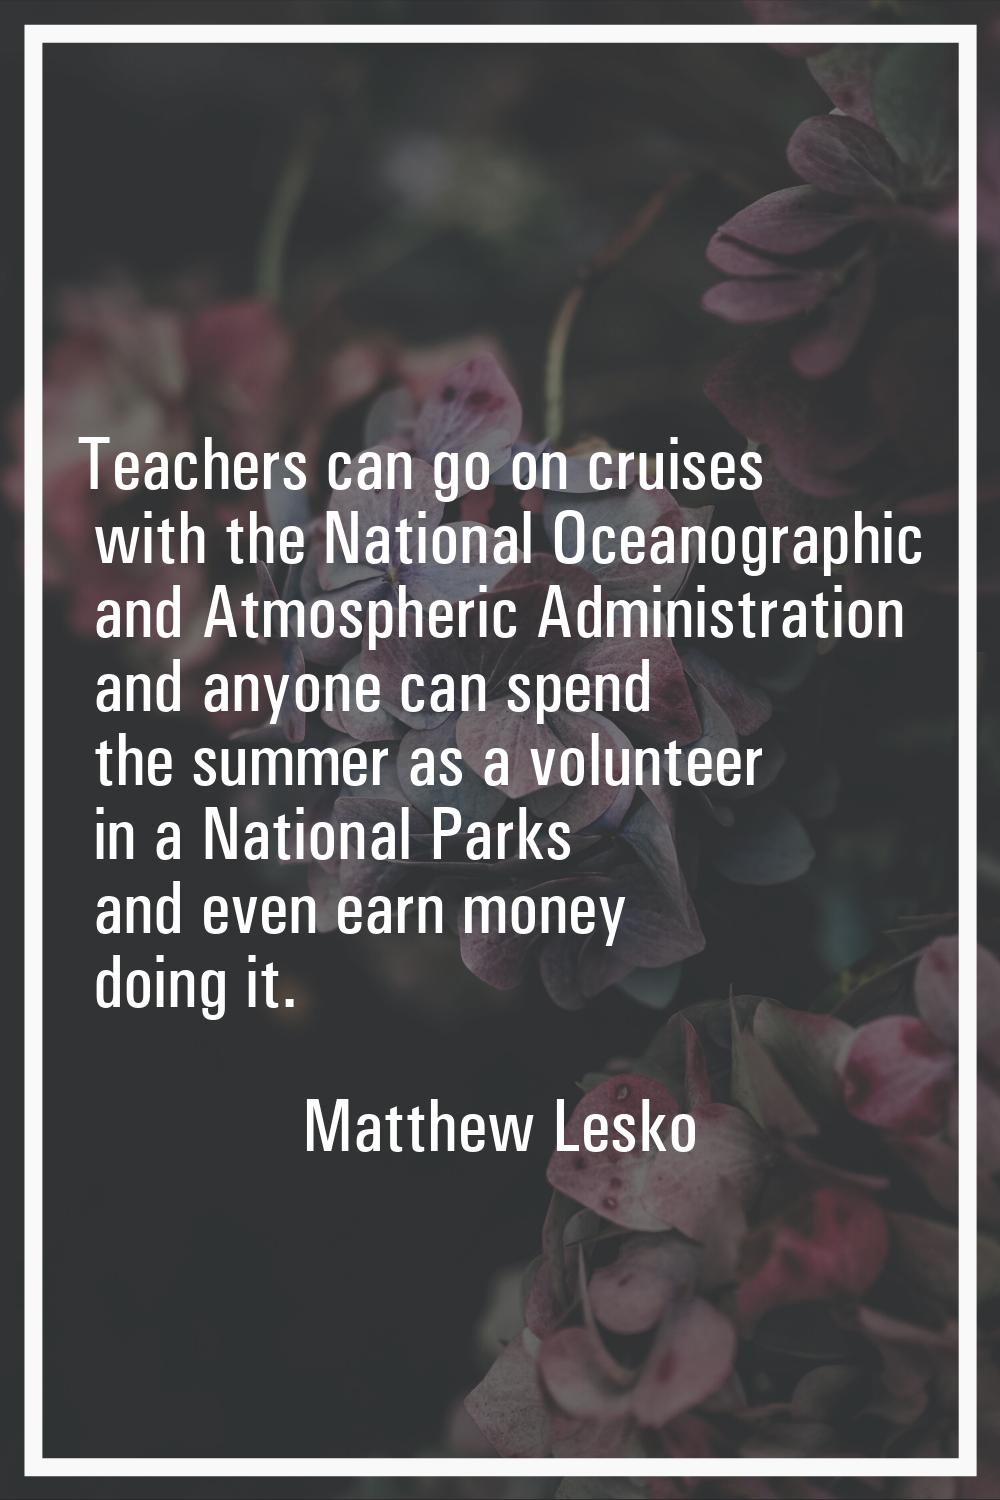 Teachers can go on cruises with the National Oceanographic and Atmospheric Administration and anyon